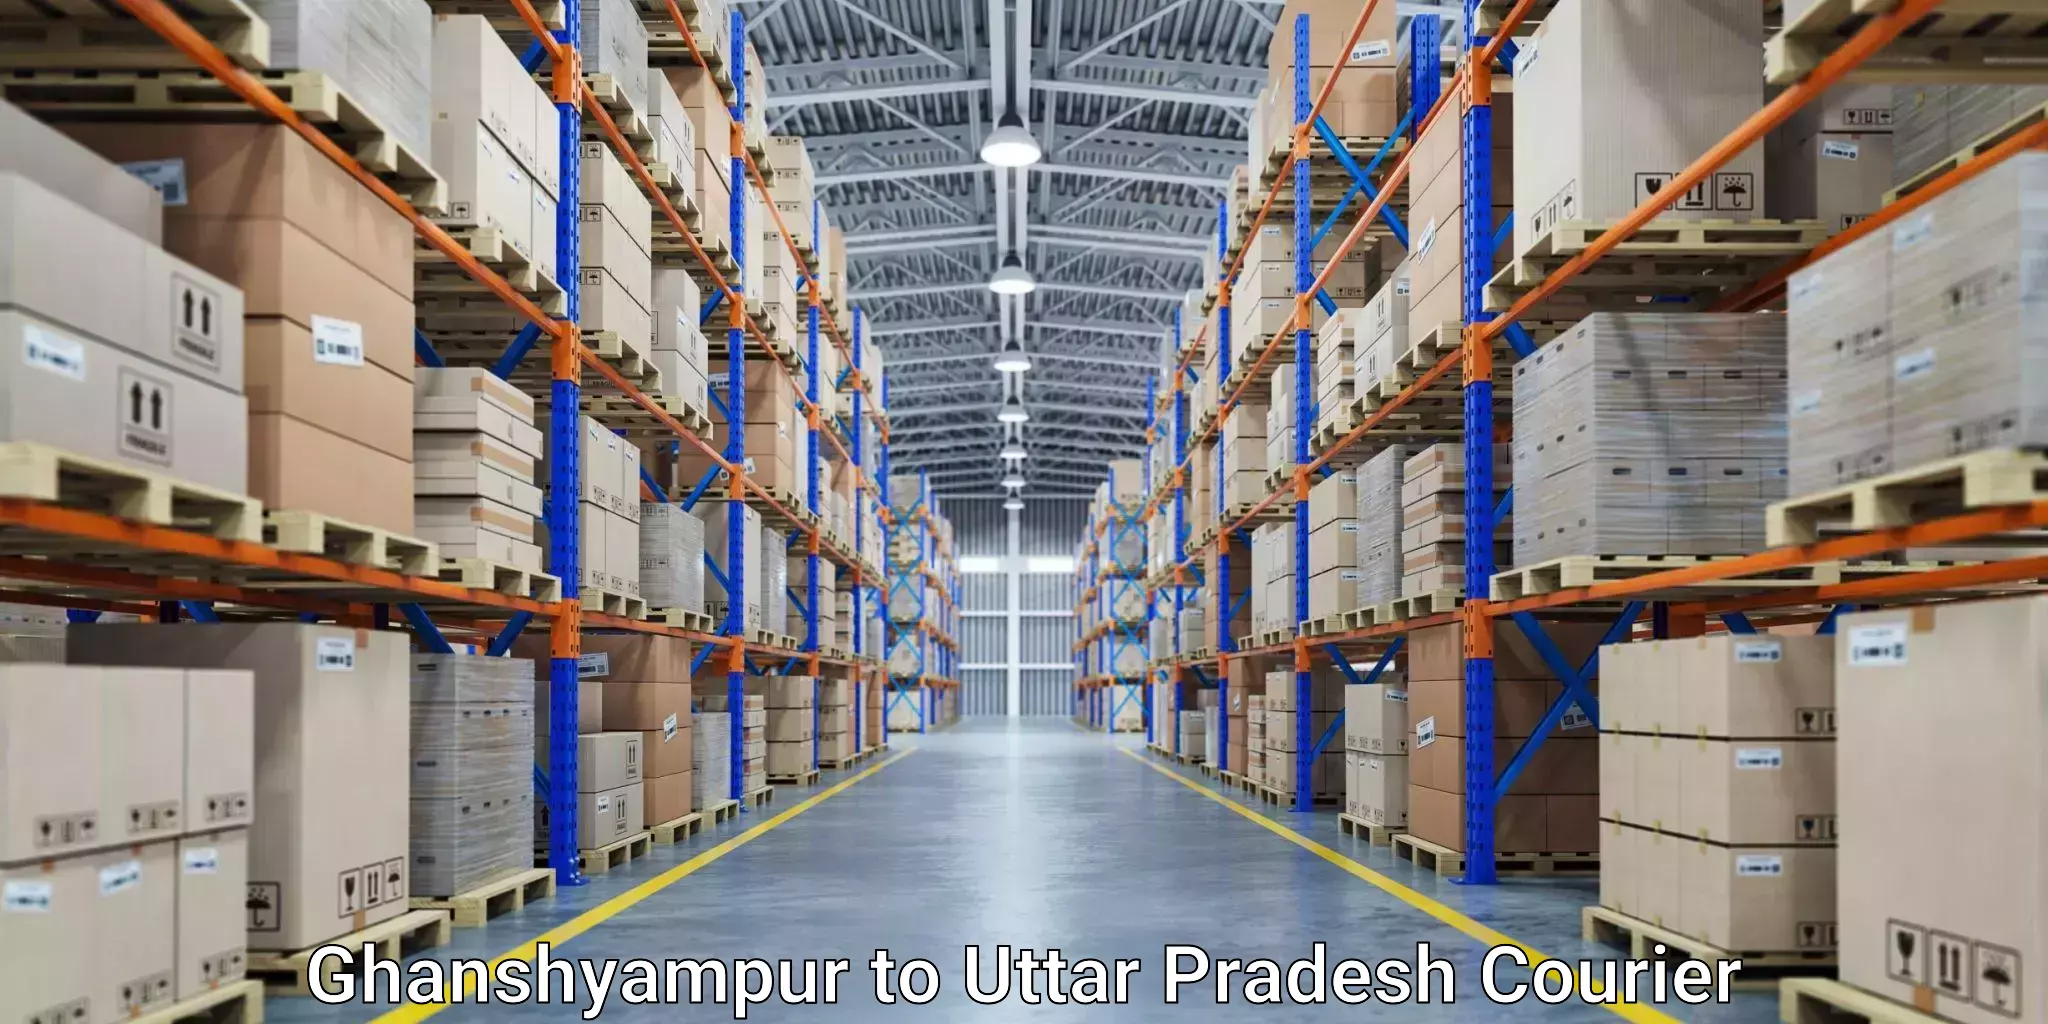 Customizable delivery plans Ghanshyampur to Mau